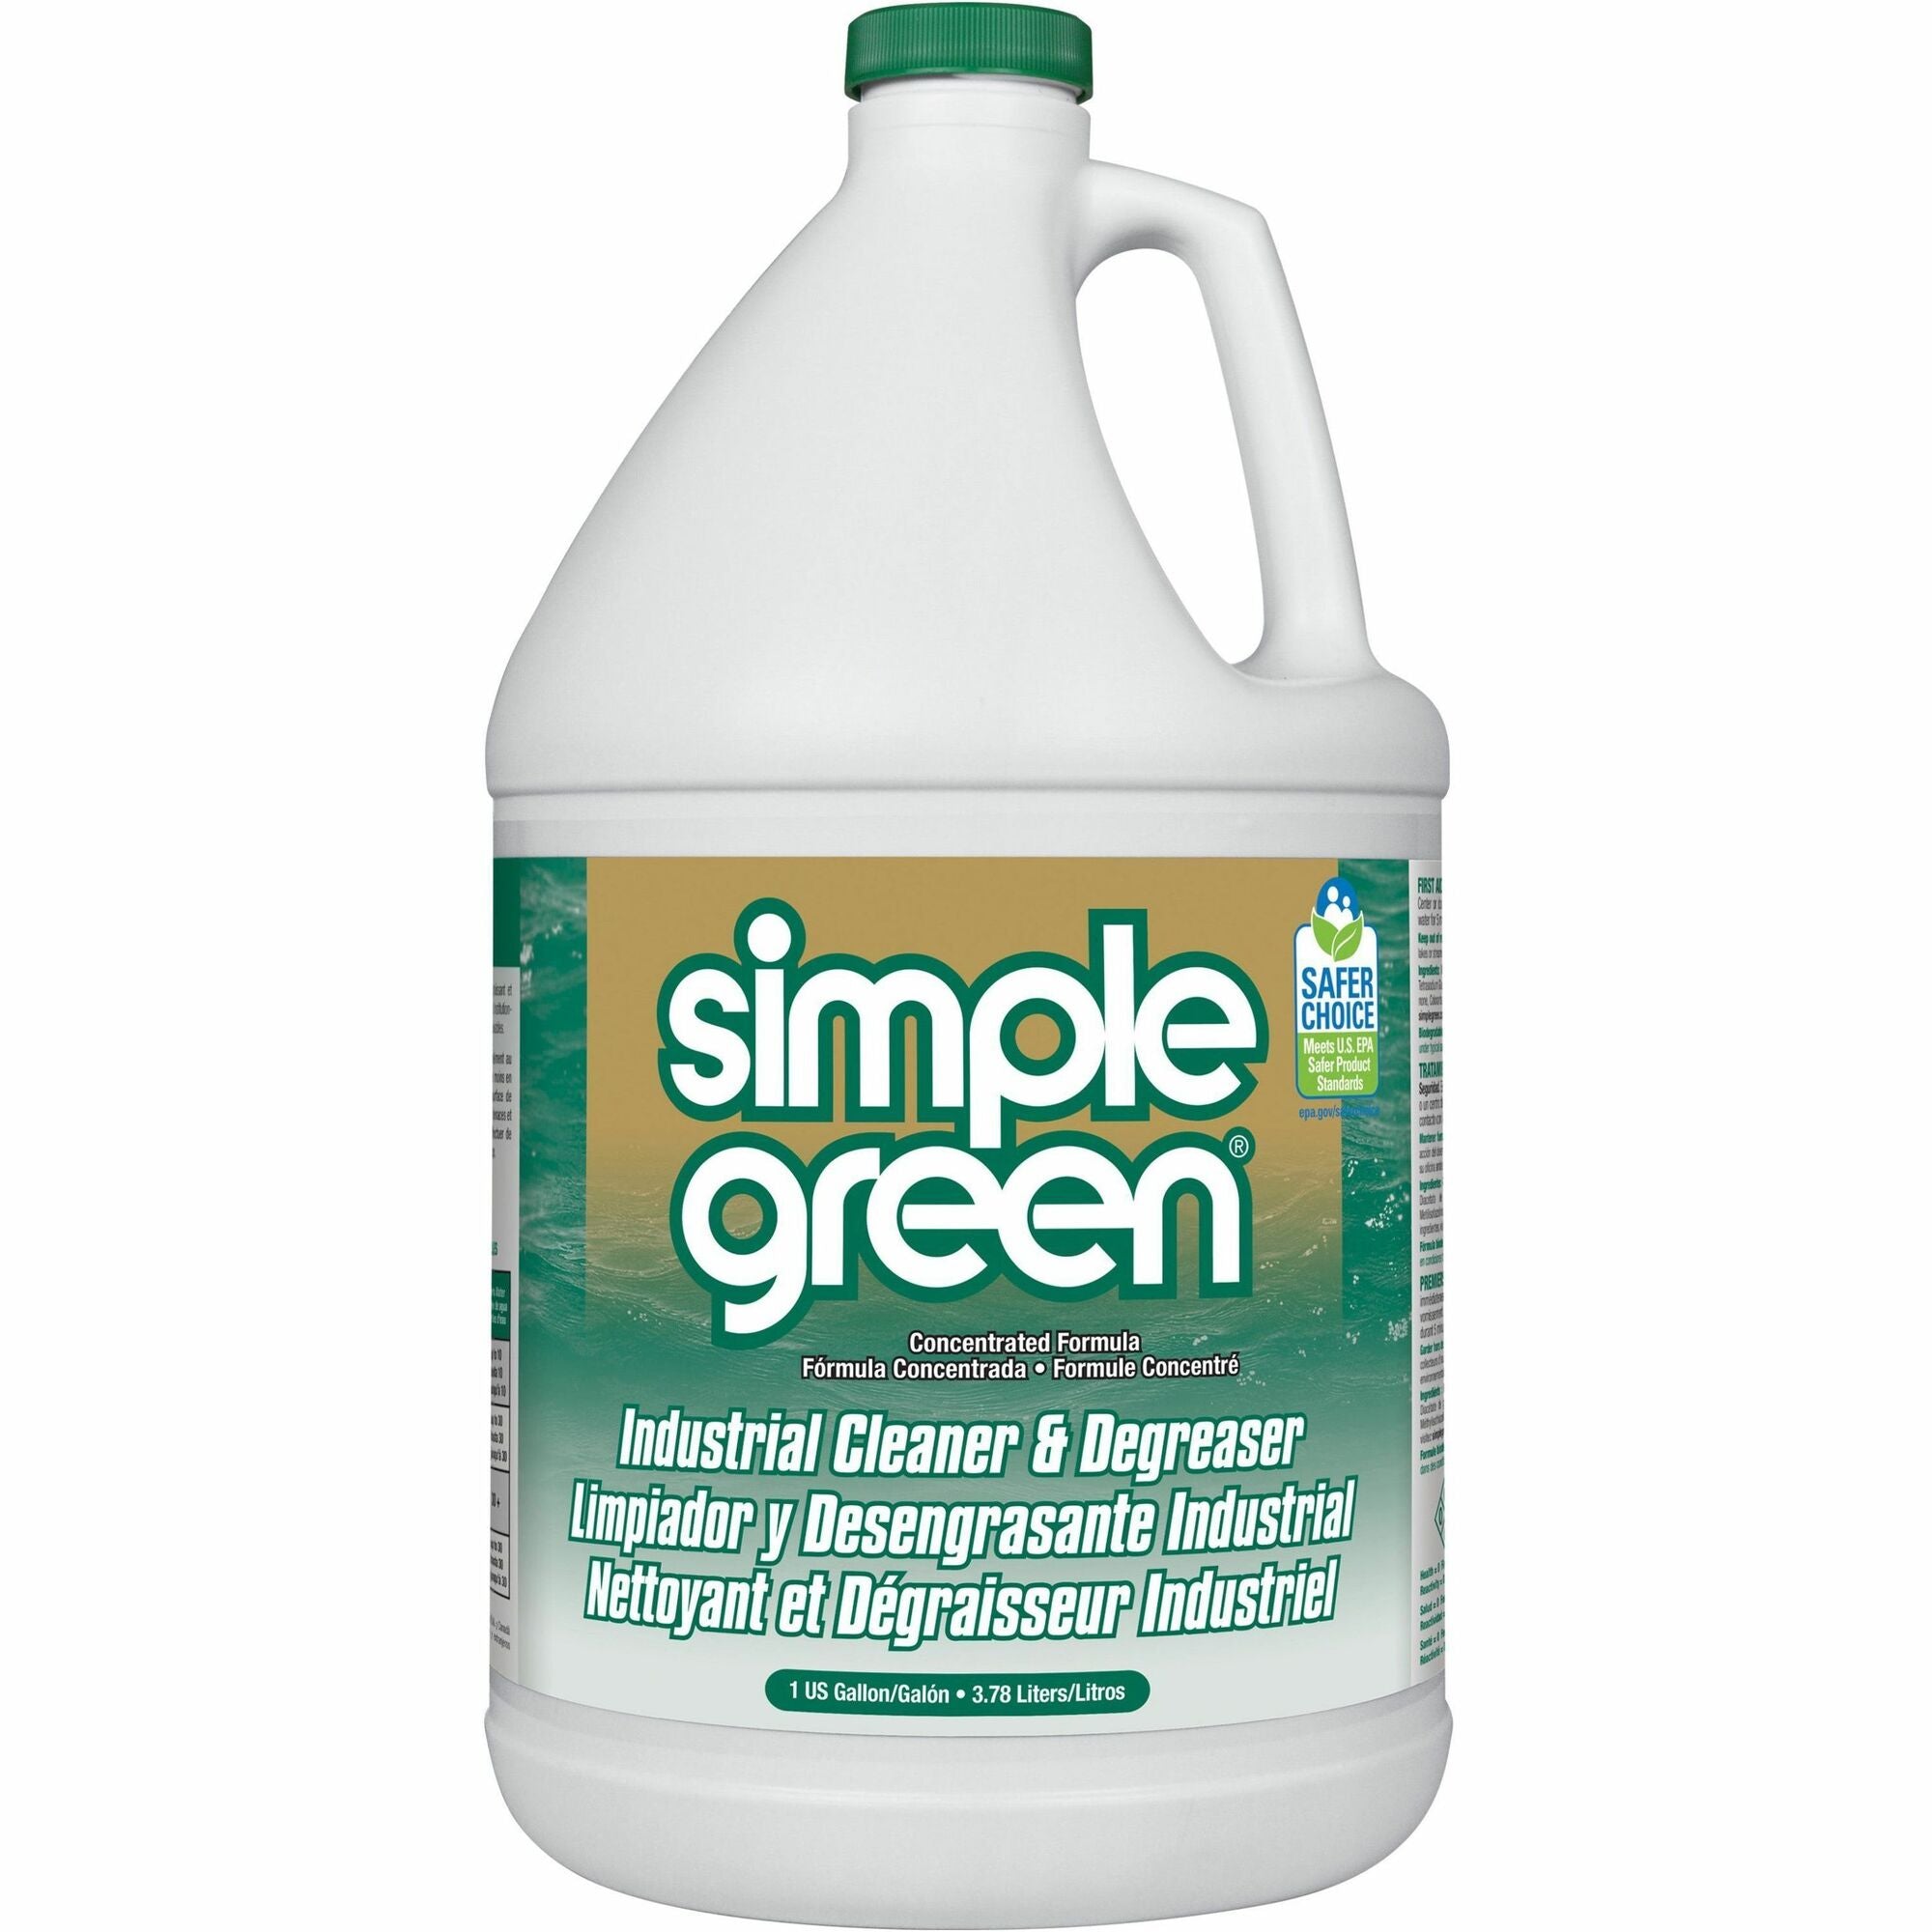 simple-green-industrial-cleaner-degreaser-concentrate-128-fl-oz-4-quart-original-scent-168-pallet-non-toxic-non-abrasive-non-corrosive-residue-free-non-flammable-white_smp13005pl - 1